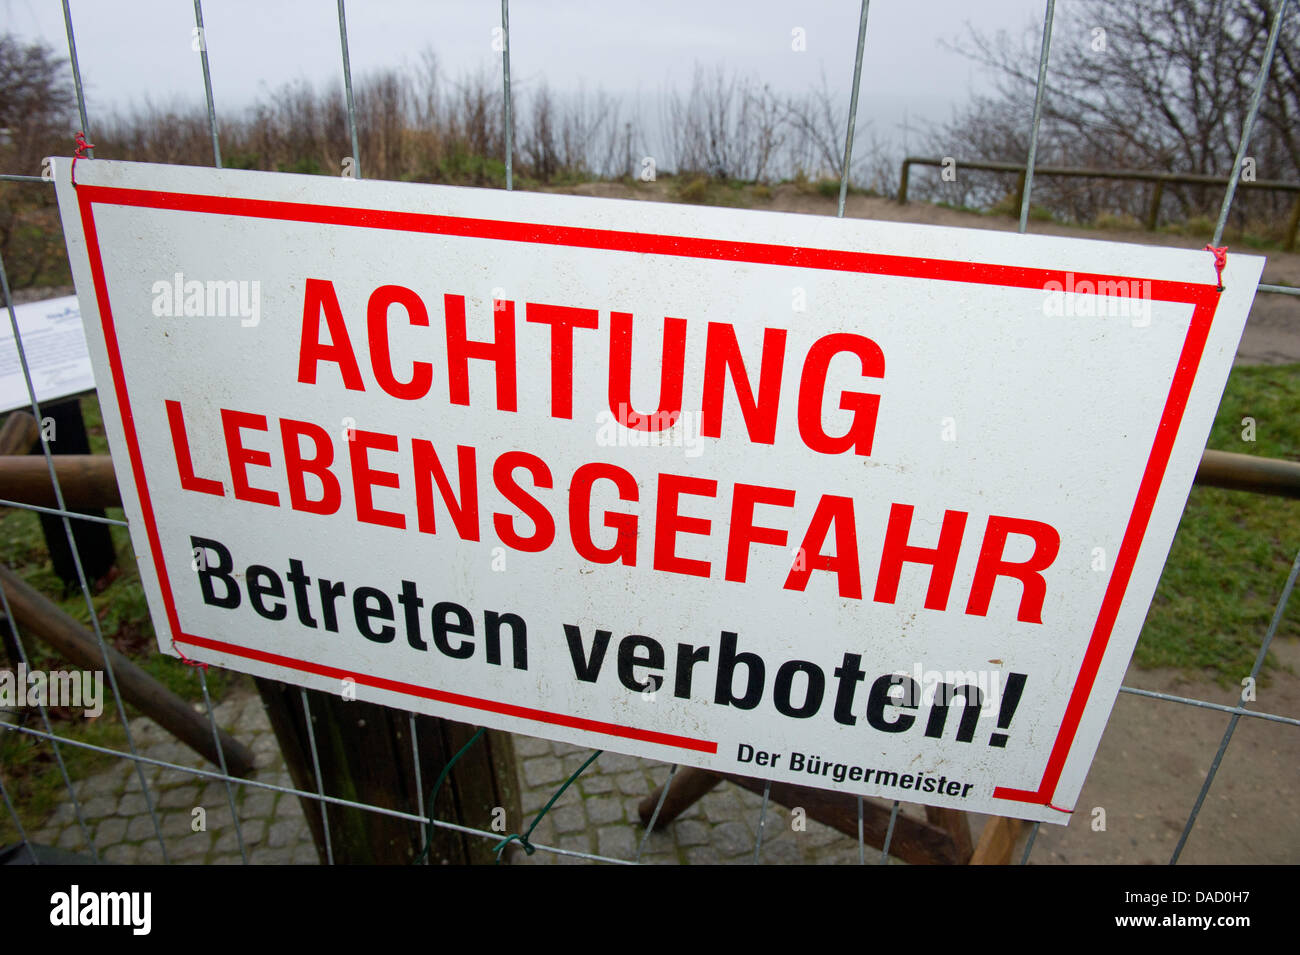 A sign which reads 'Achtung Lebensgefahr, Betreten verboten!', Attention, danger to life, keep off the ground!' on the access pathway to the steep cliff line at Cape Arkona on the island of Ruegen, Putgarten, Germany, 28 December 2011. On Monday afternoon, 26 December 2011, several thousand cubic metres of clay and chalkstone crashed into the sea taking by surprise a mother and her Stock Photo